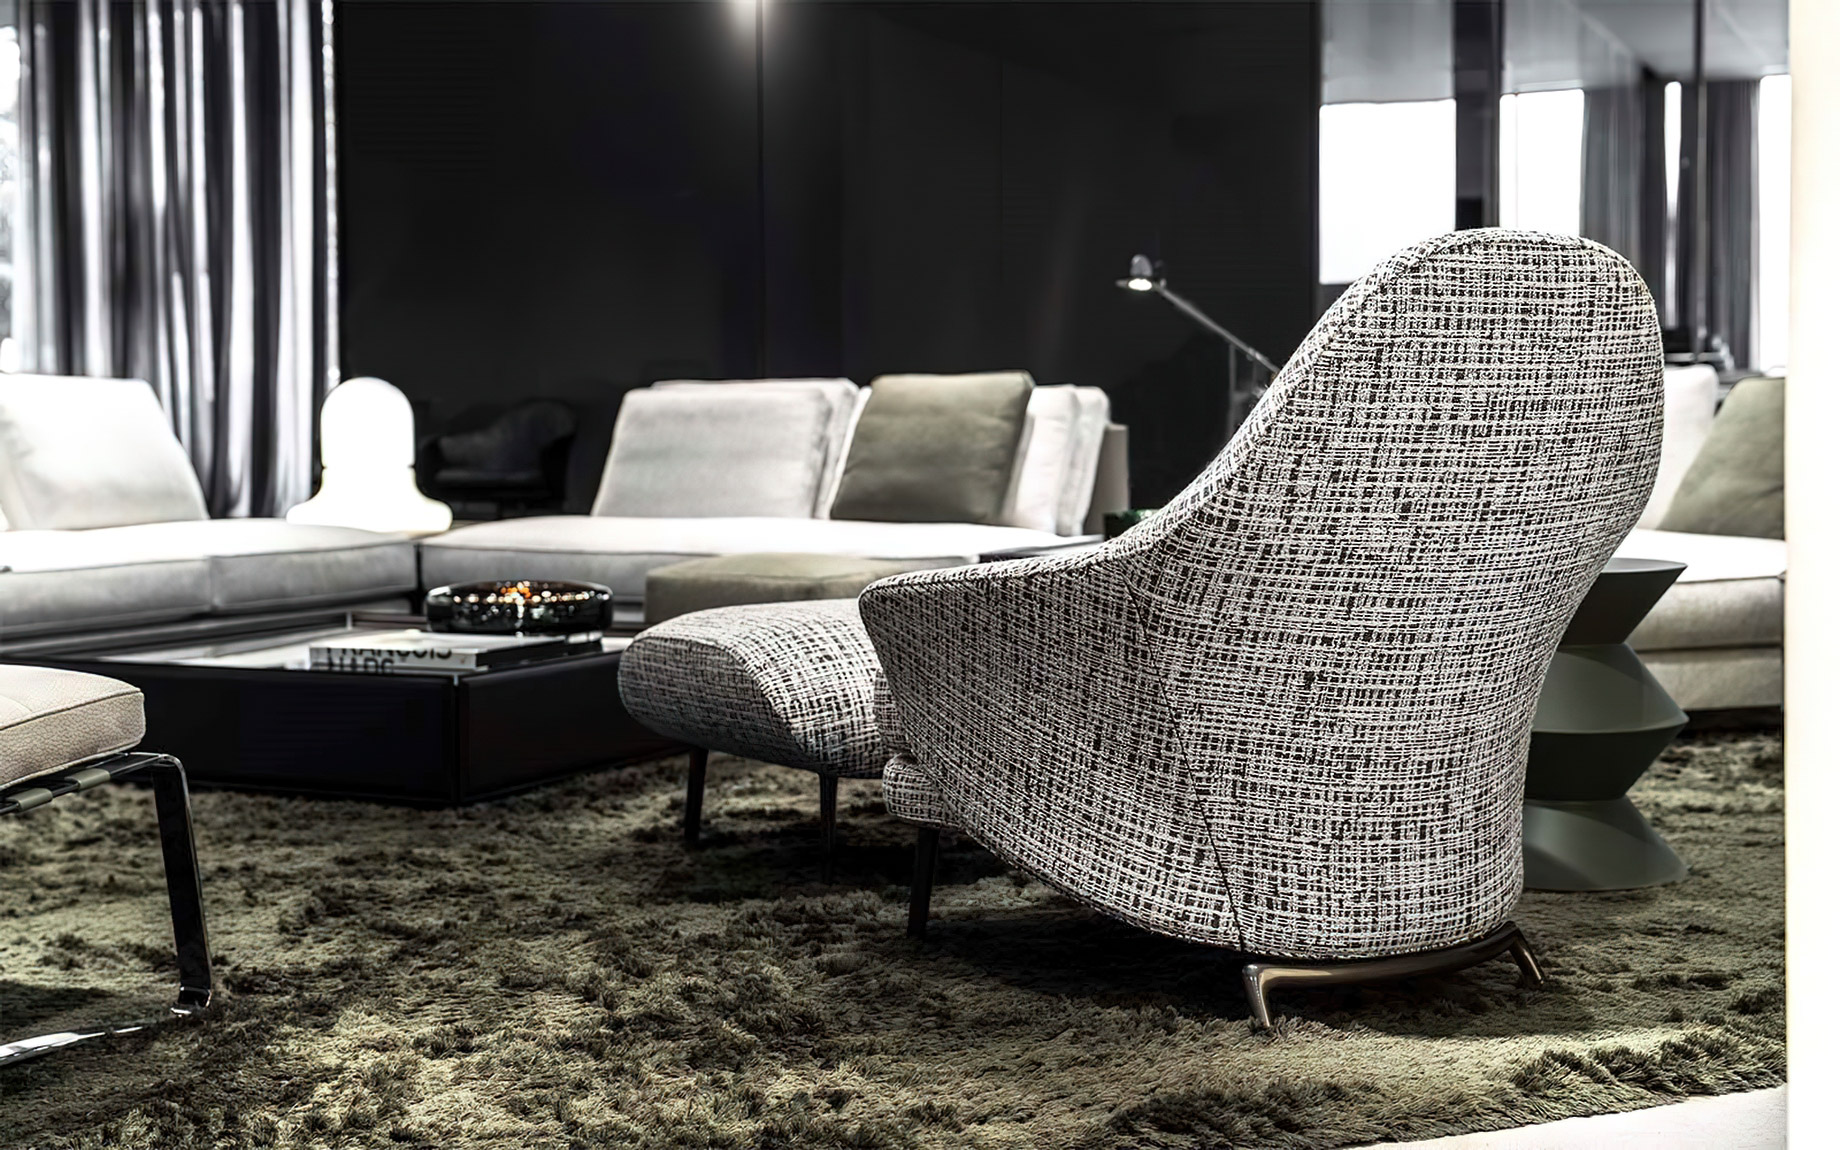 Angie Armchair Collection a Sculptural Gesture by Minotti, Italy – GamFratesi